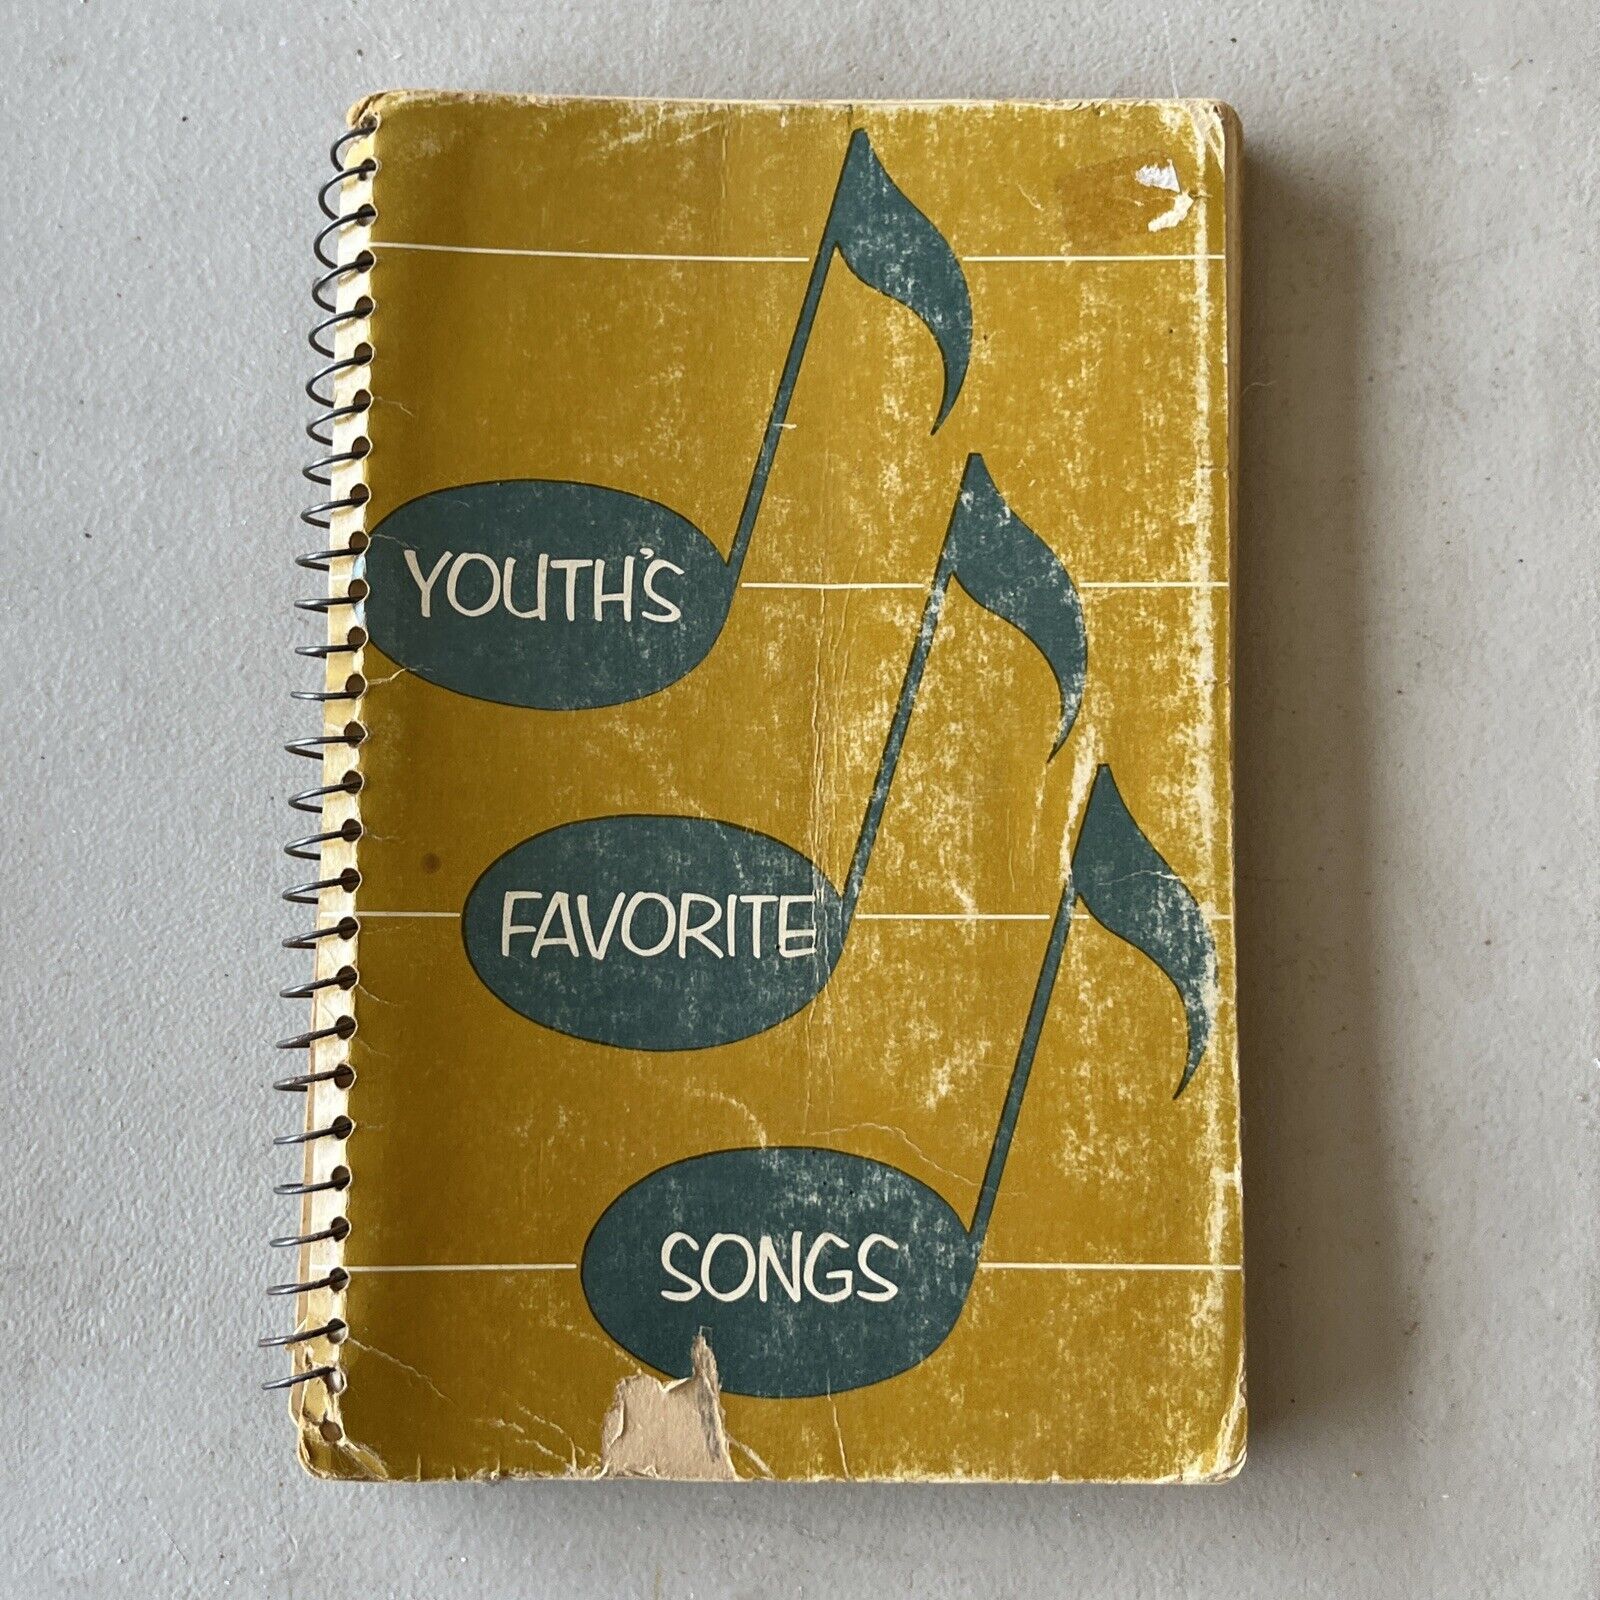 Primary image for Youth's Favorite Songs by Augustana Luther League (Spiral-bound)